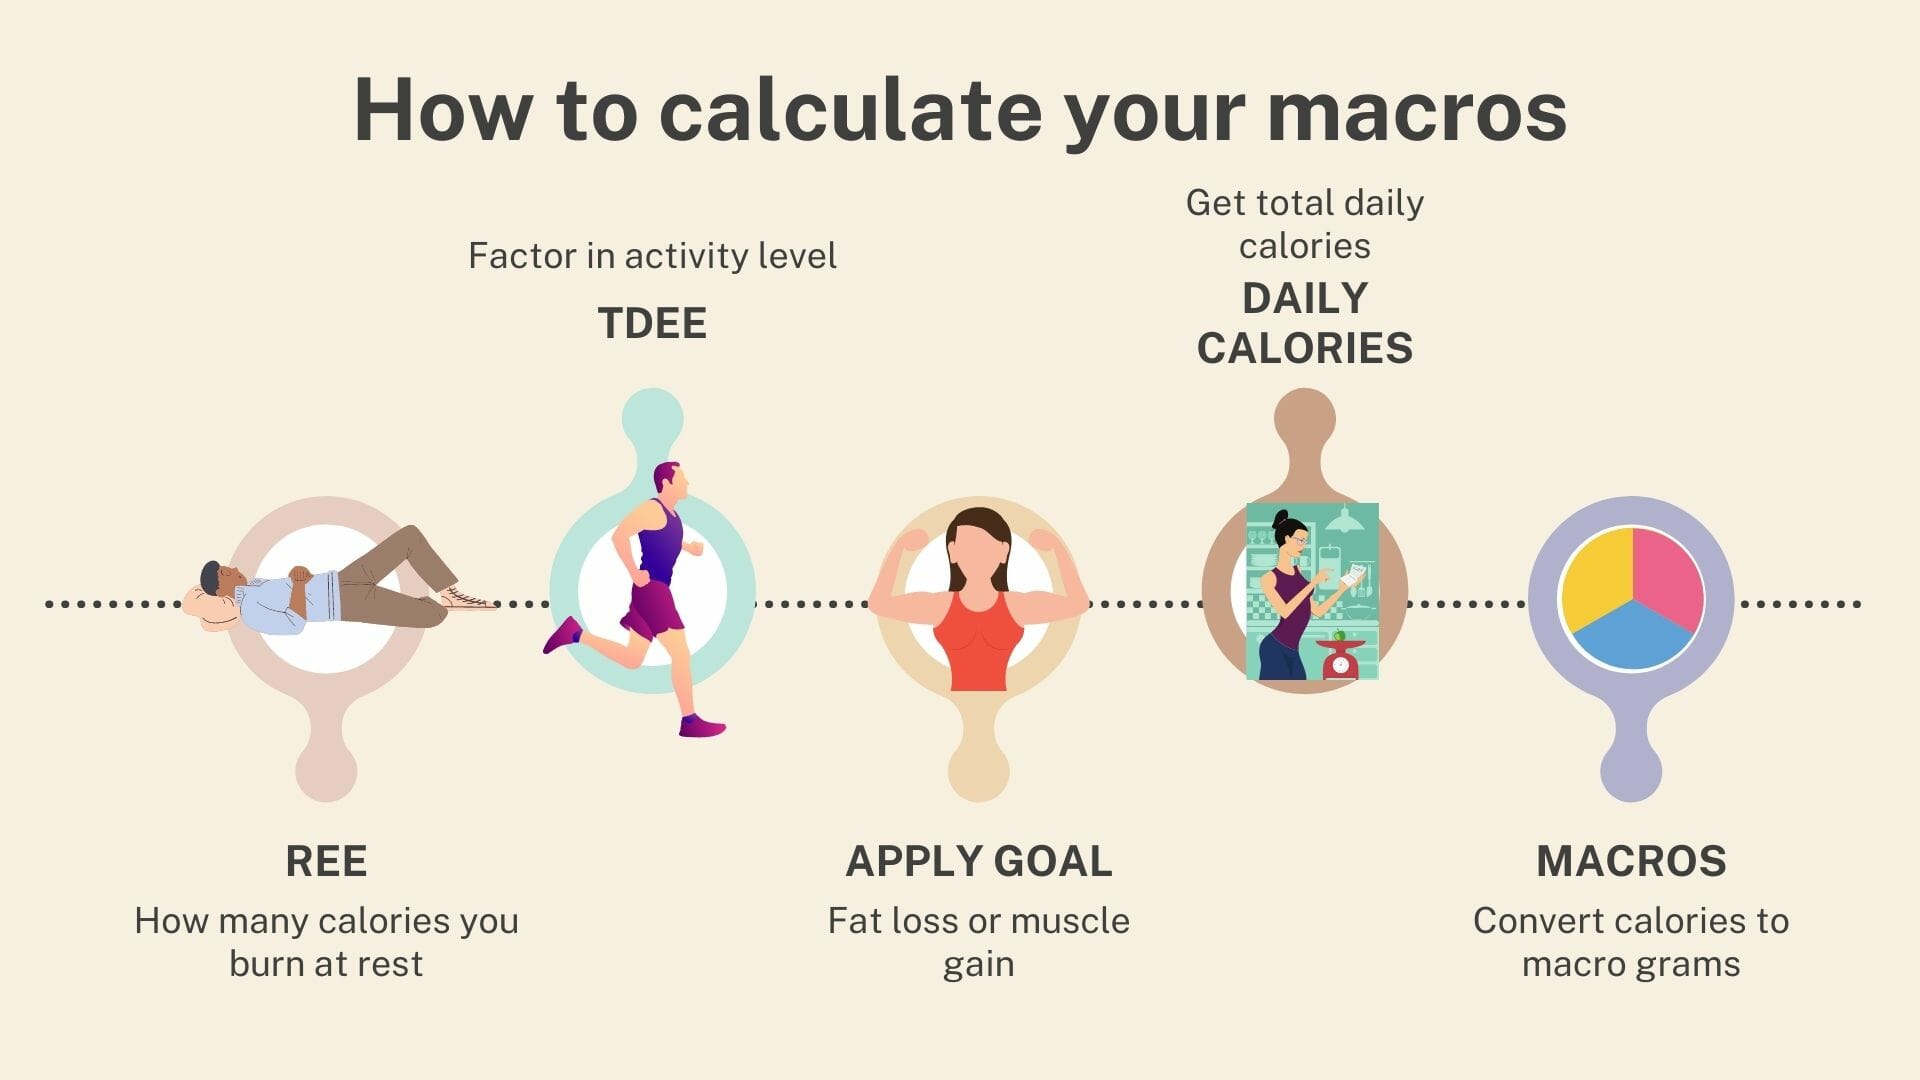 How to Weigh Food For Macros: A Beginner's Guide - Fit Healthy Macros